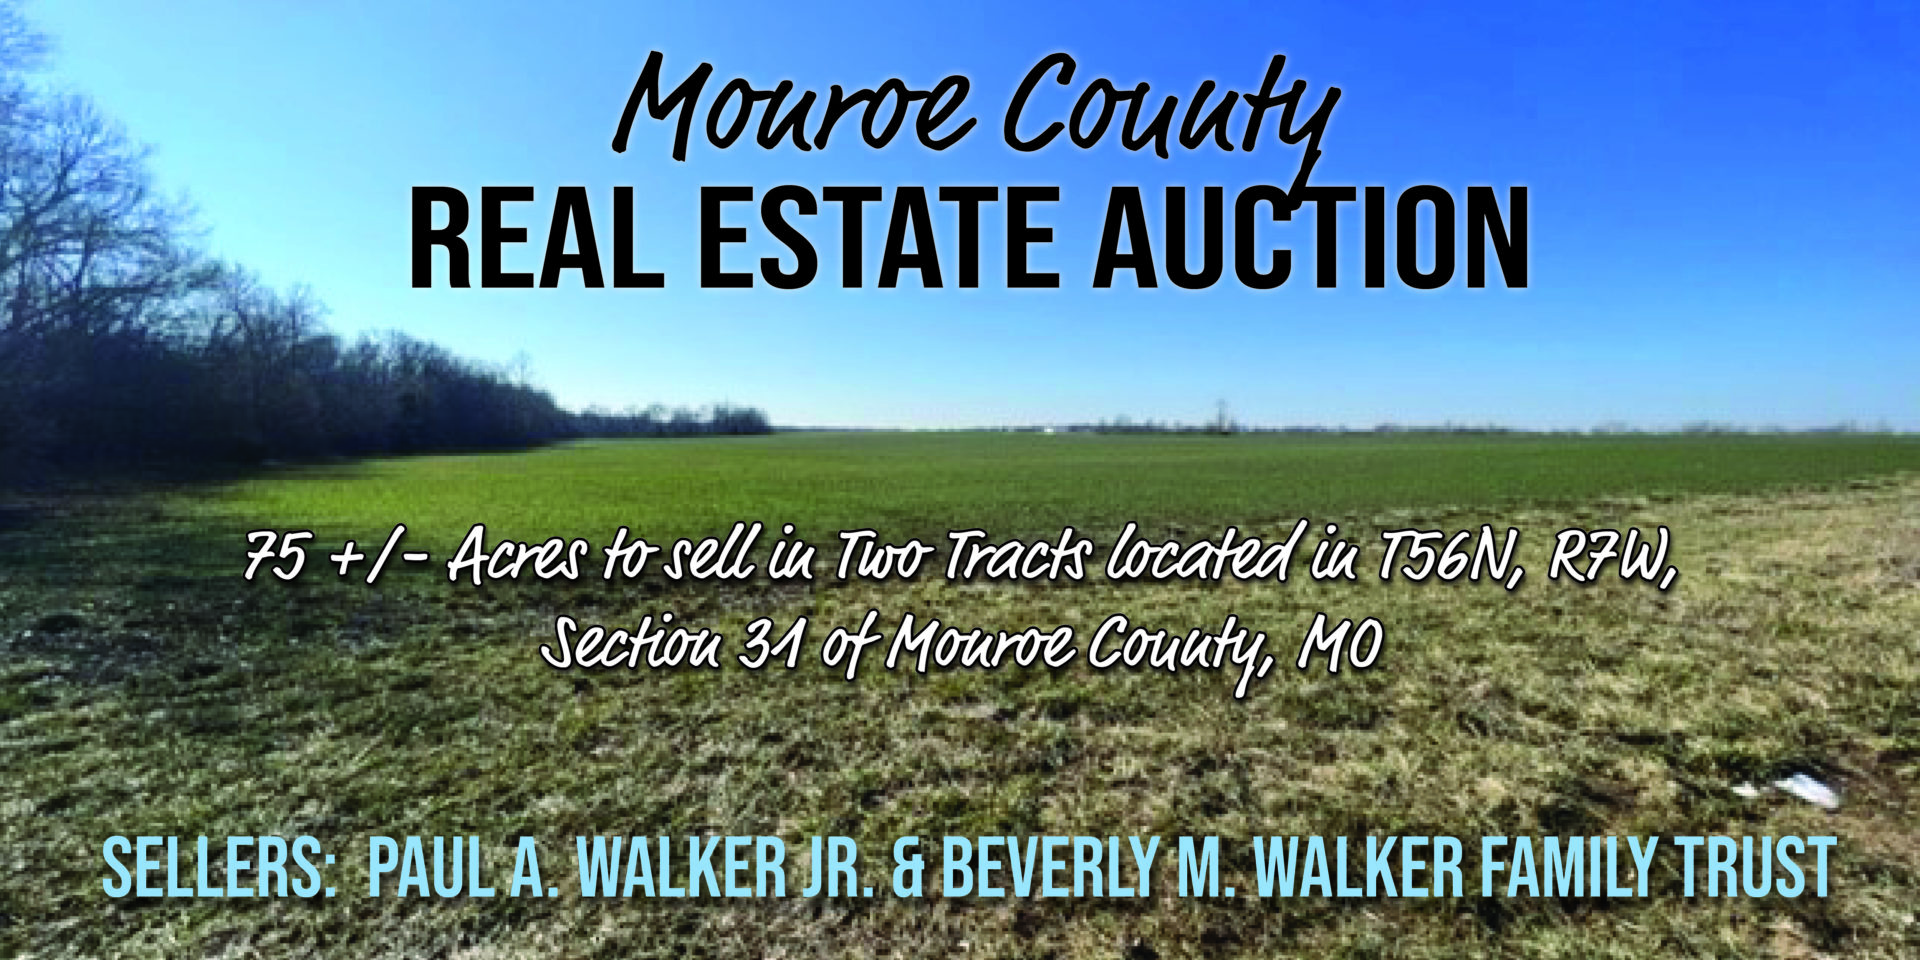 Monroe County Real Estate Auction